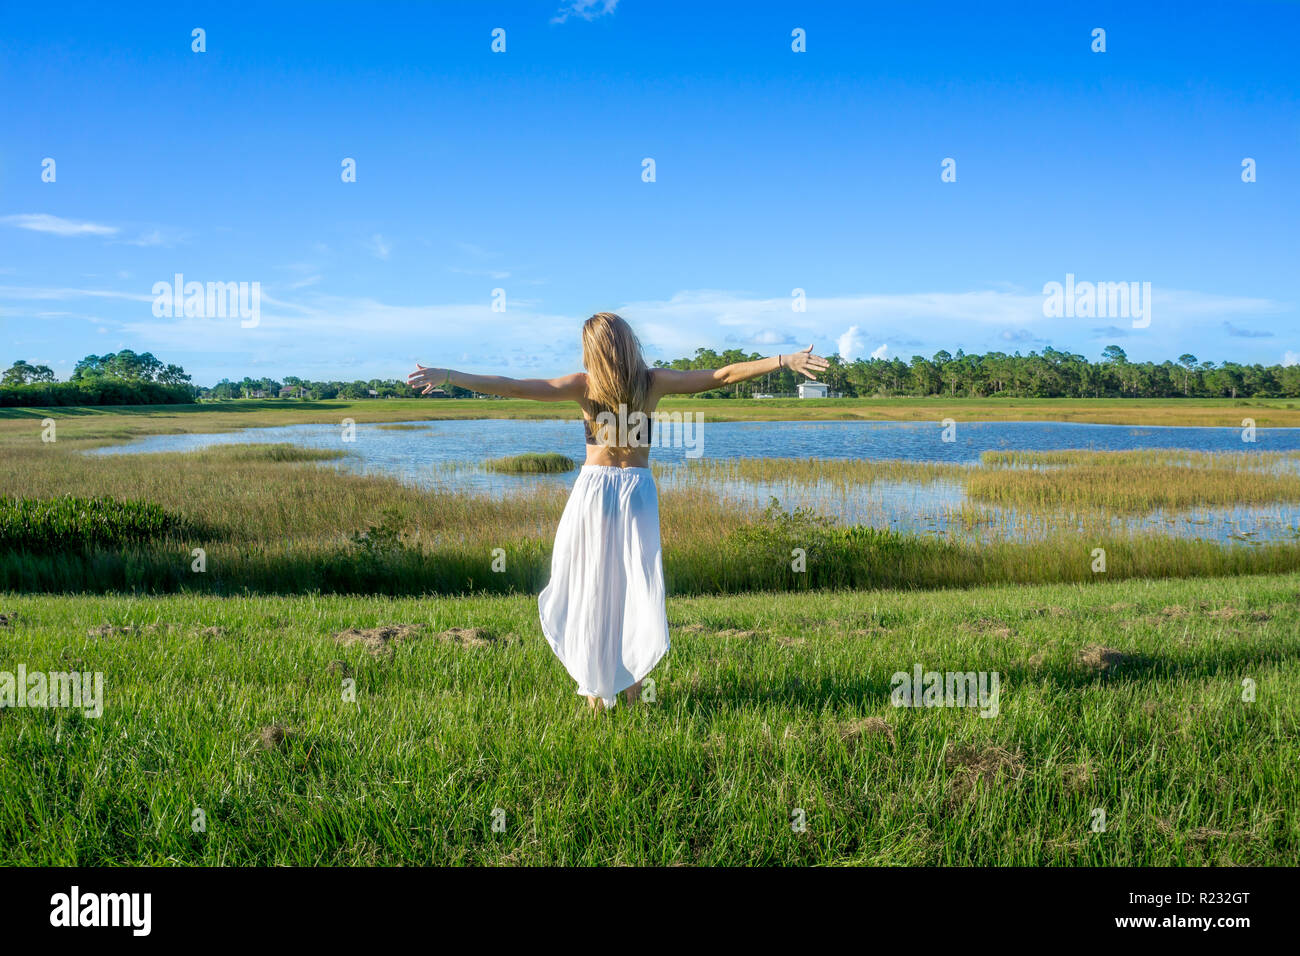 Normal blonde young woman with long hair back standing backwards in a beautiful field landscape outdoors with raise hands arms to the sky Stock Photo